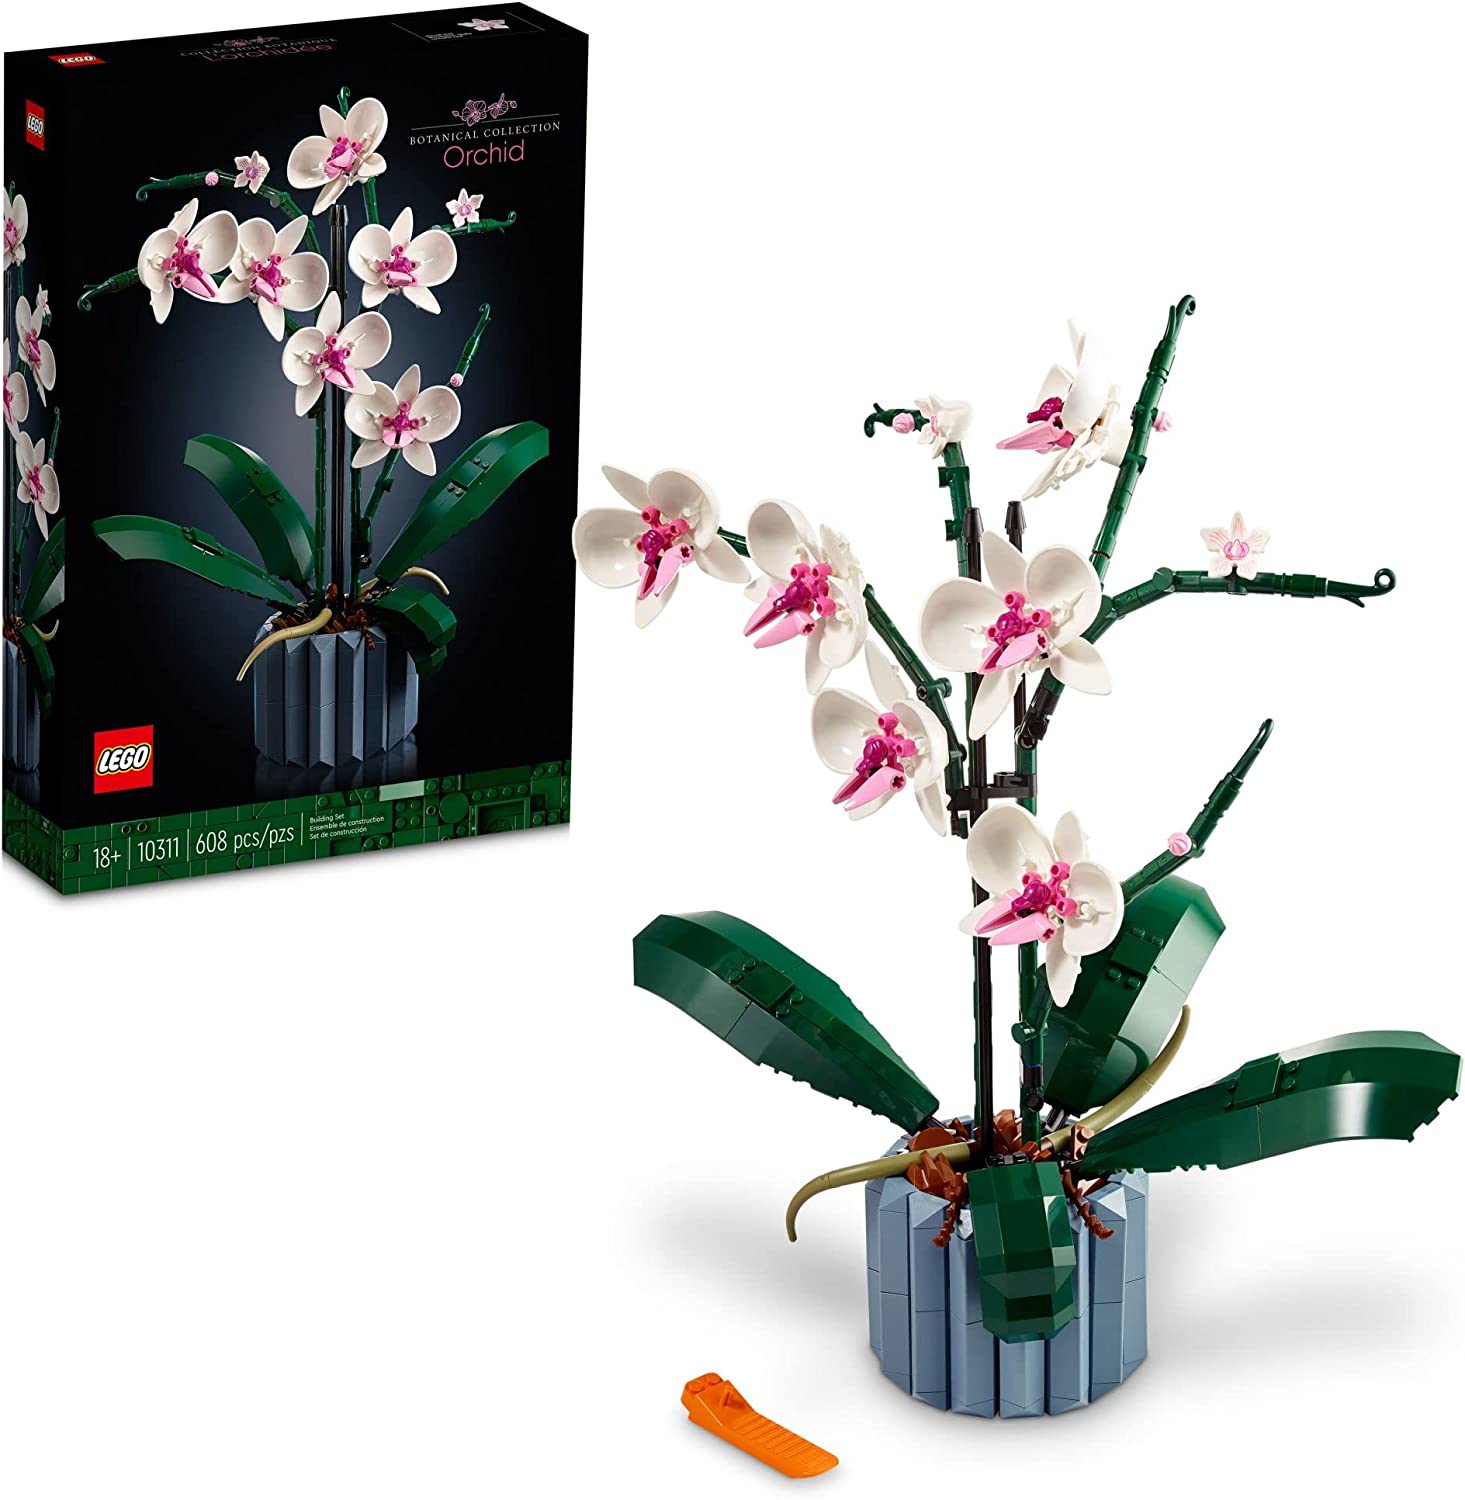 LEGO Icons Orchid Set 10311